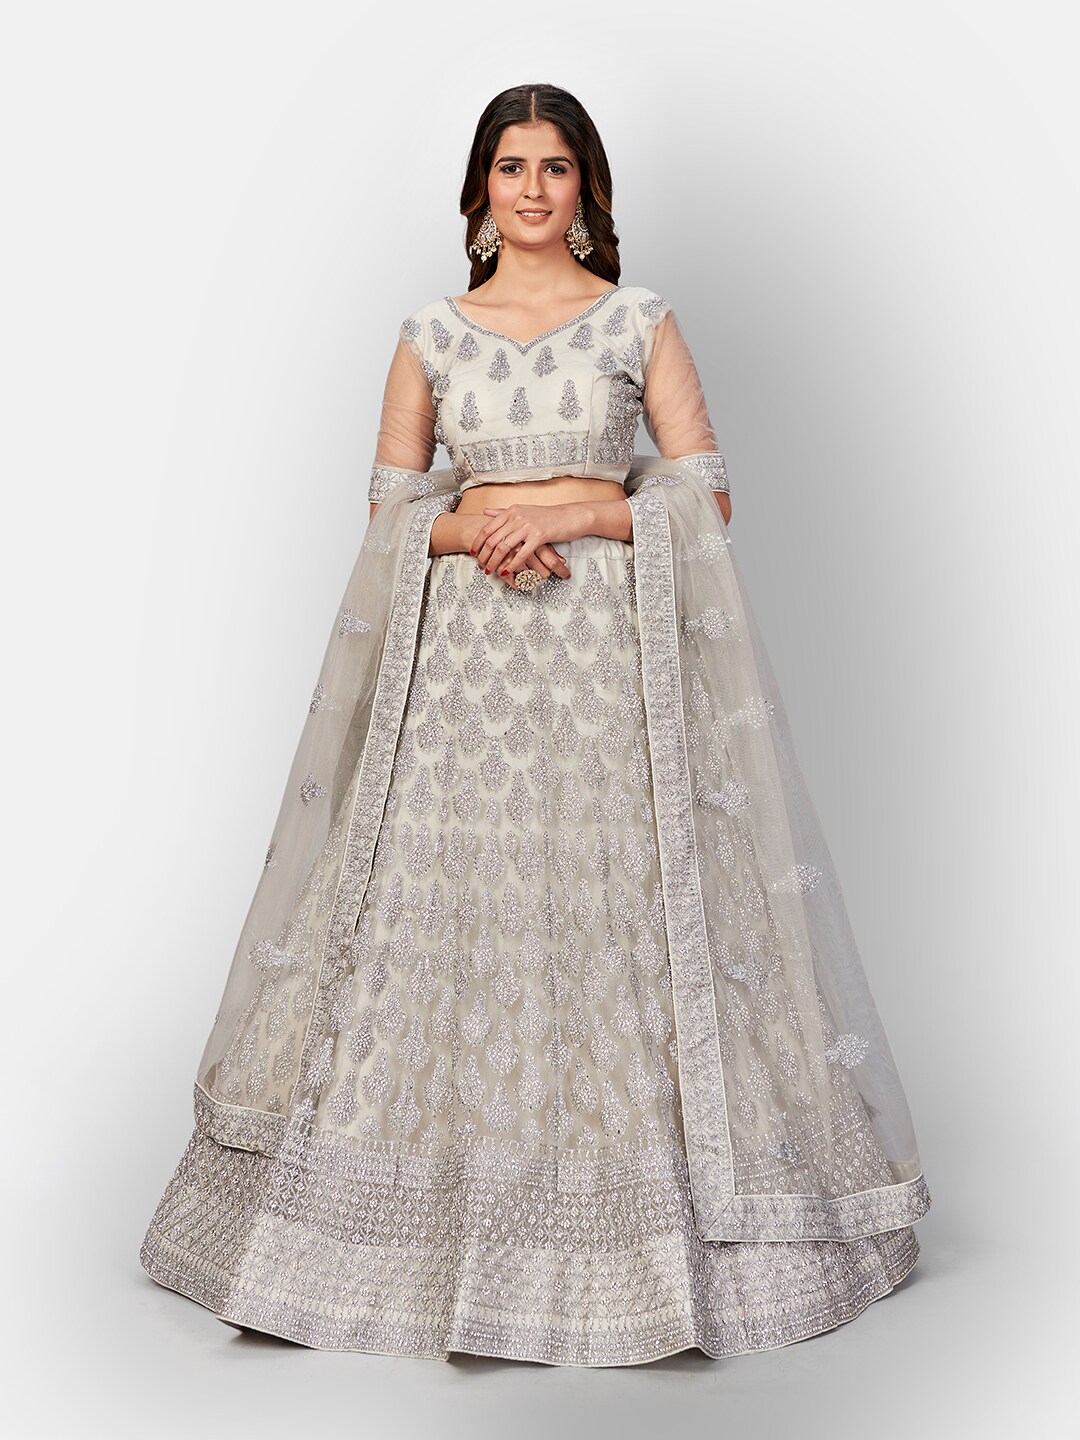 SHOPGARB Grey & White Embellished Beads and Stones Semi-Stitched Lehenga & Unstitched Blouse With Dupatta Price in India